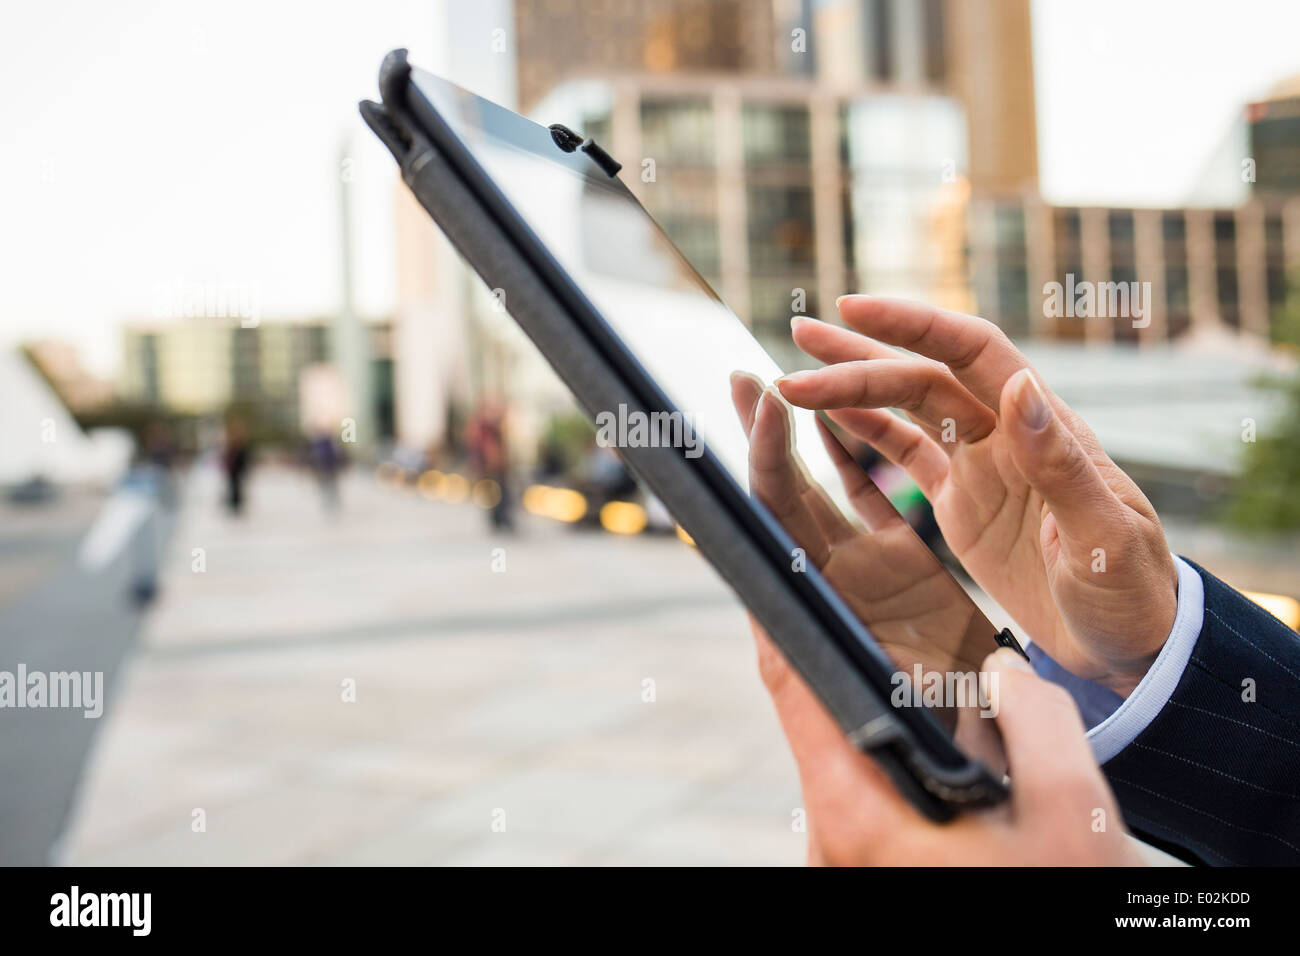 Female Digital Tablet hand outdoor Building Stock Photo